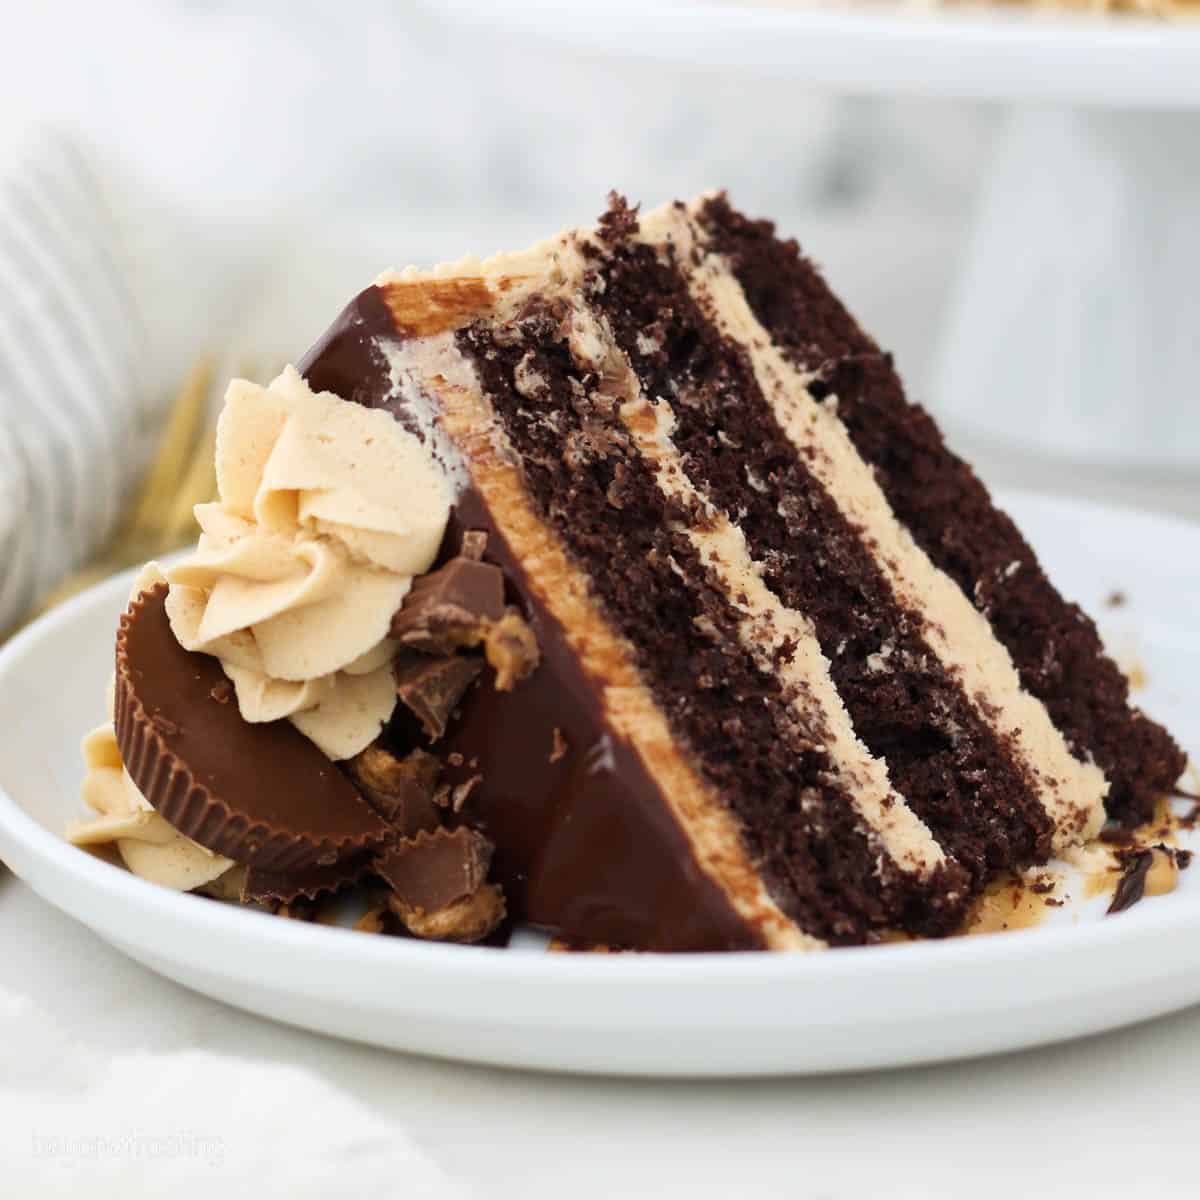 A slice of frosted chocolate peanut butter cake on a white plate.